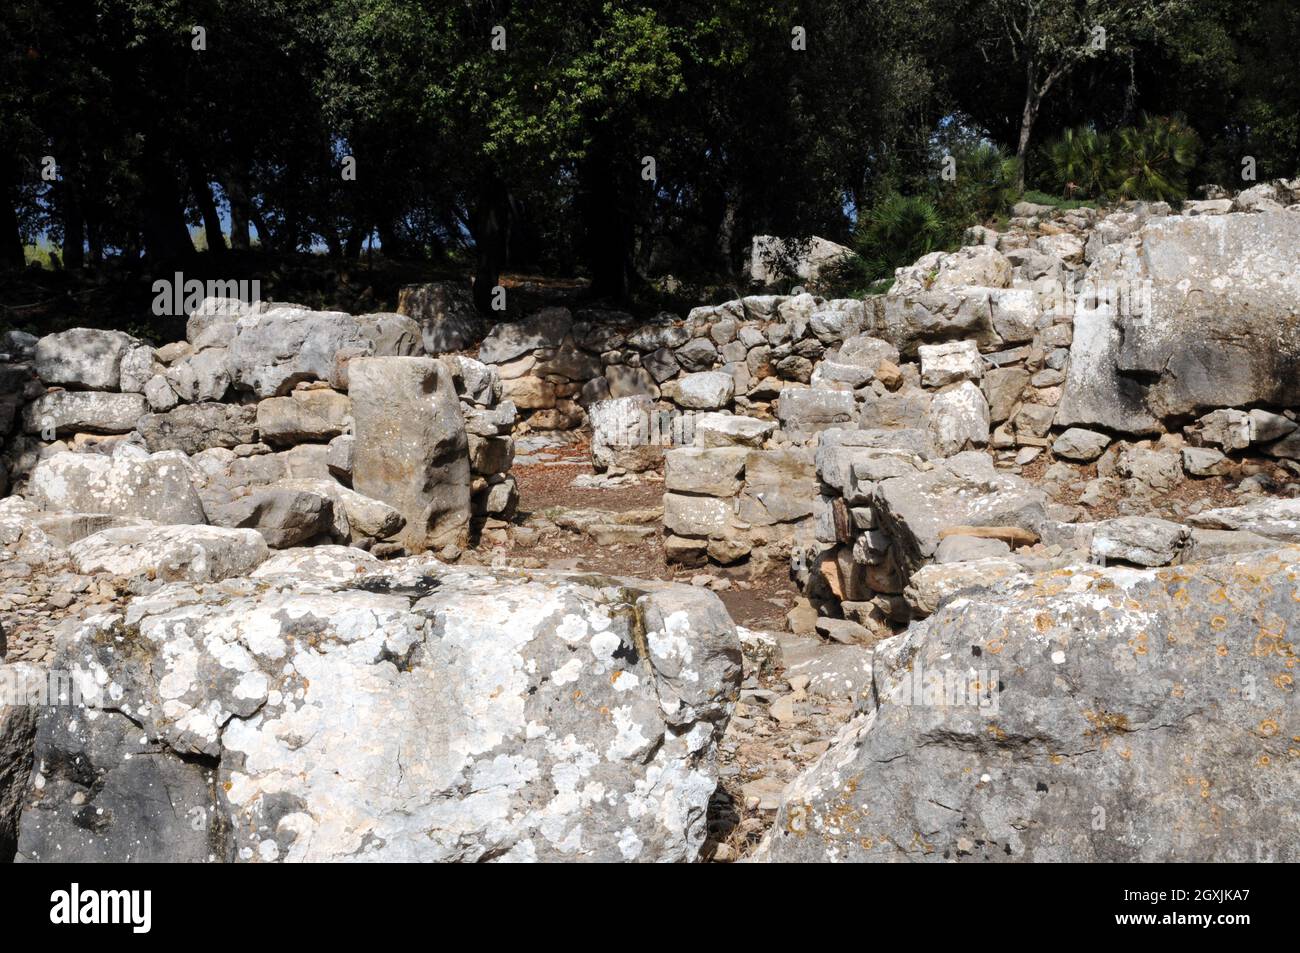 The archaeological excavations at the talaiotic settlement at Ses Paisses near the Mallorcan town of Arta. They date from 1 300 - 900 BC. Stock Photo